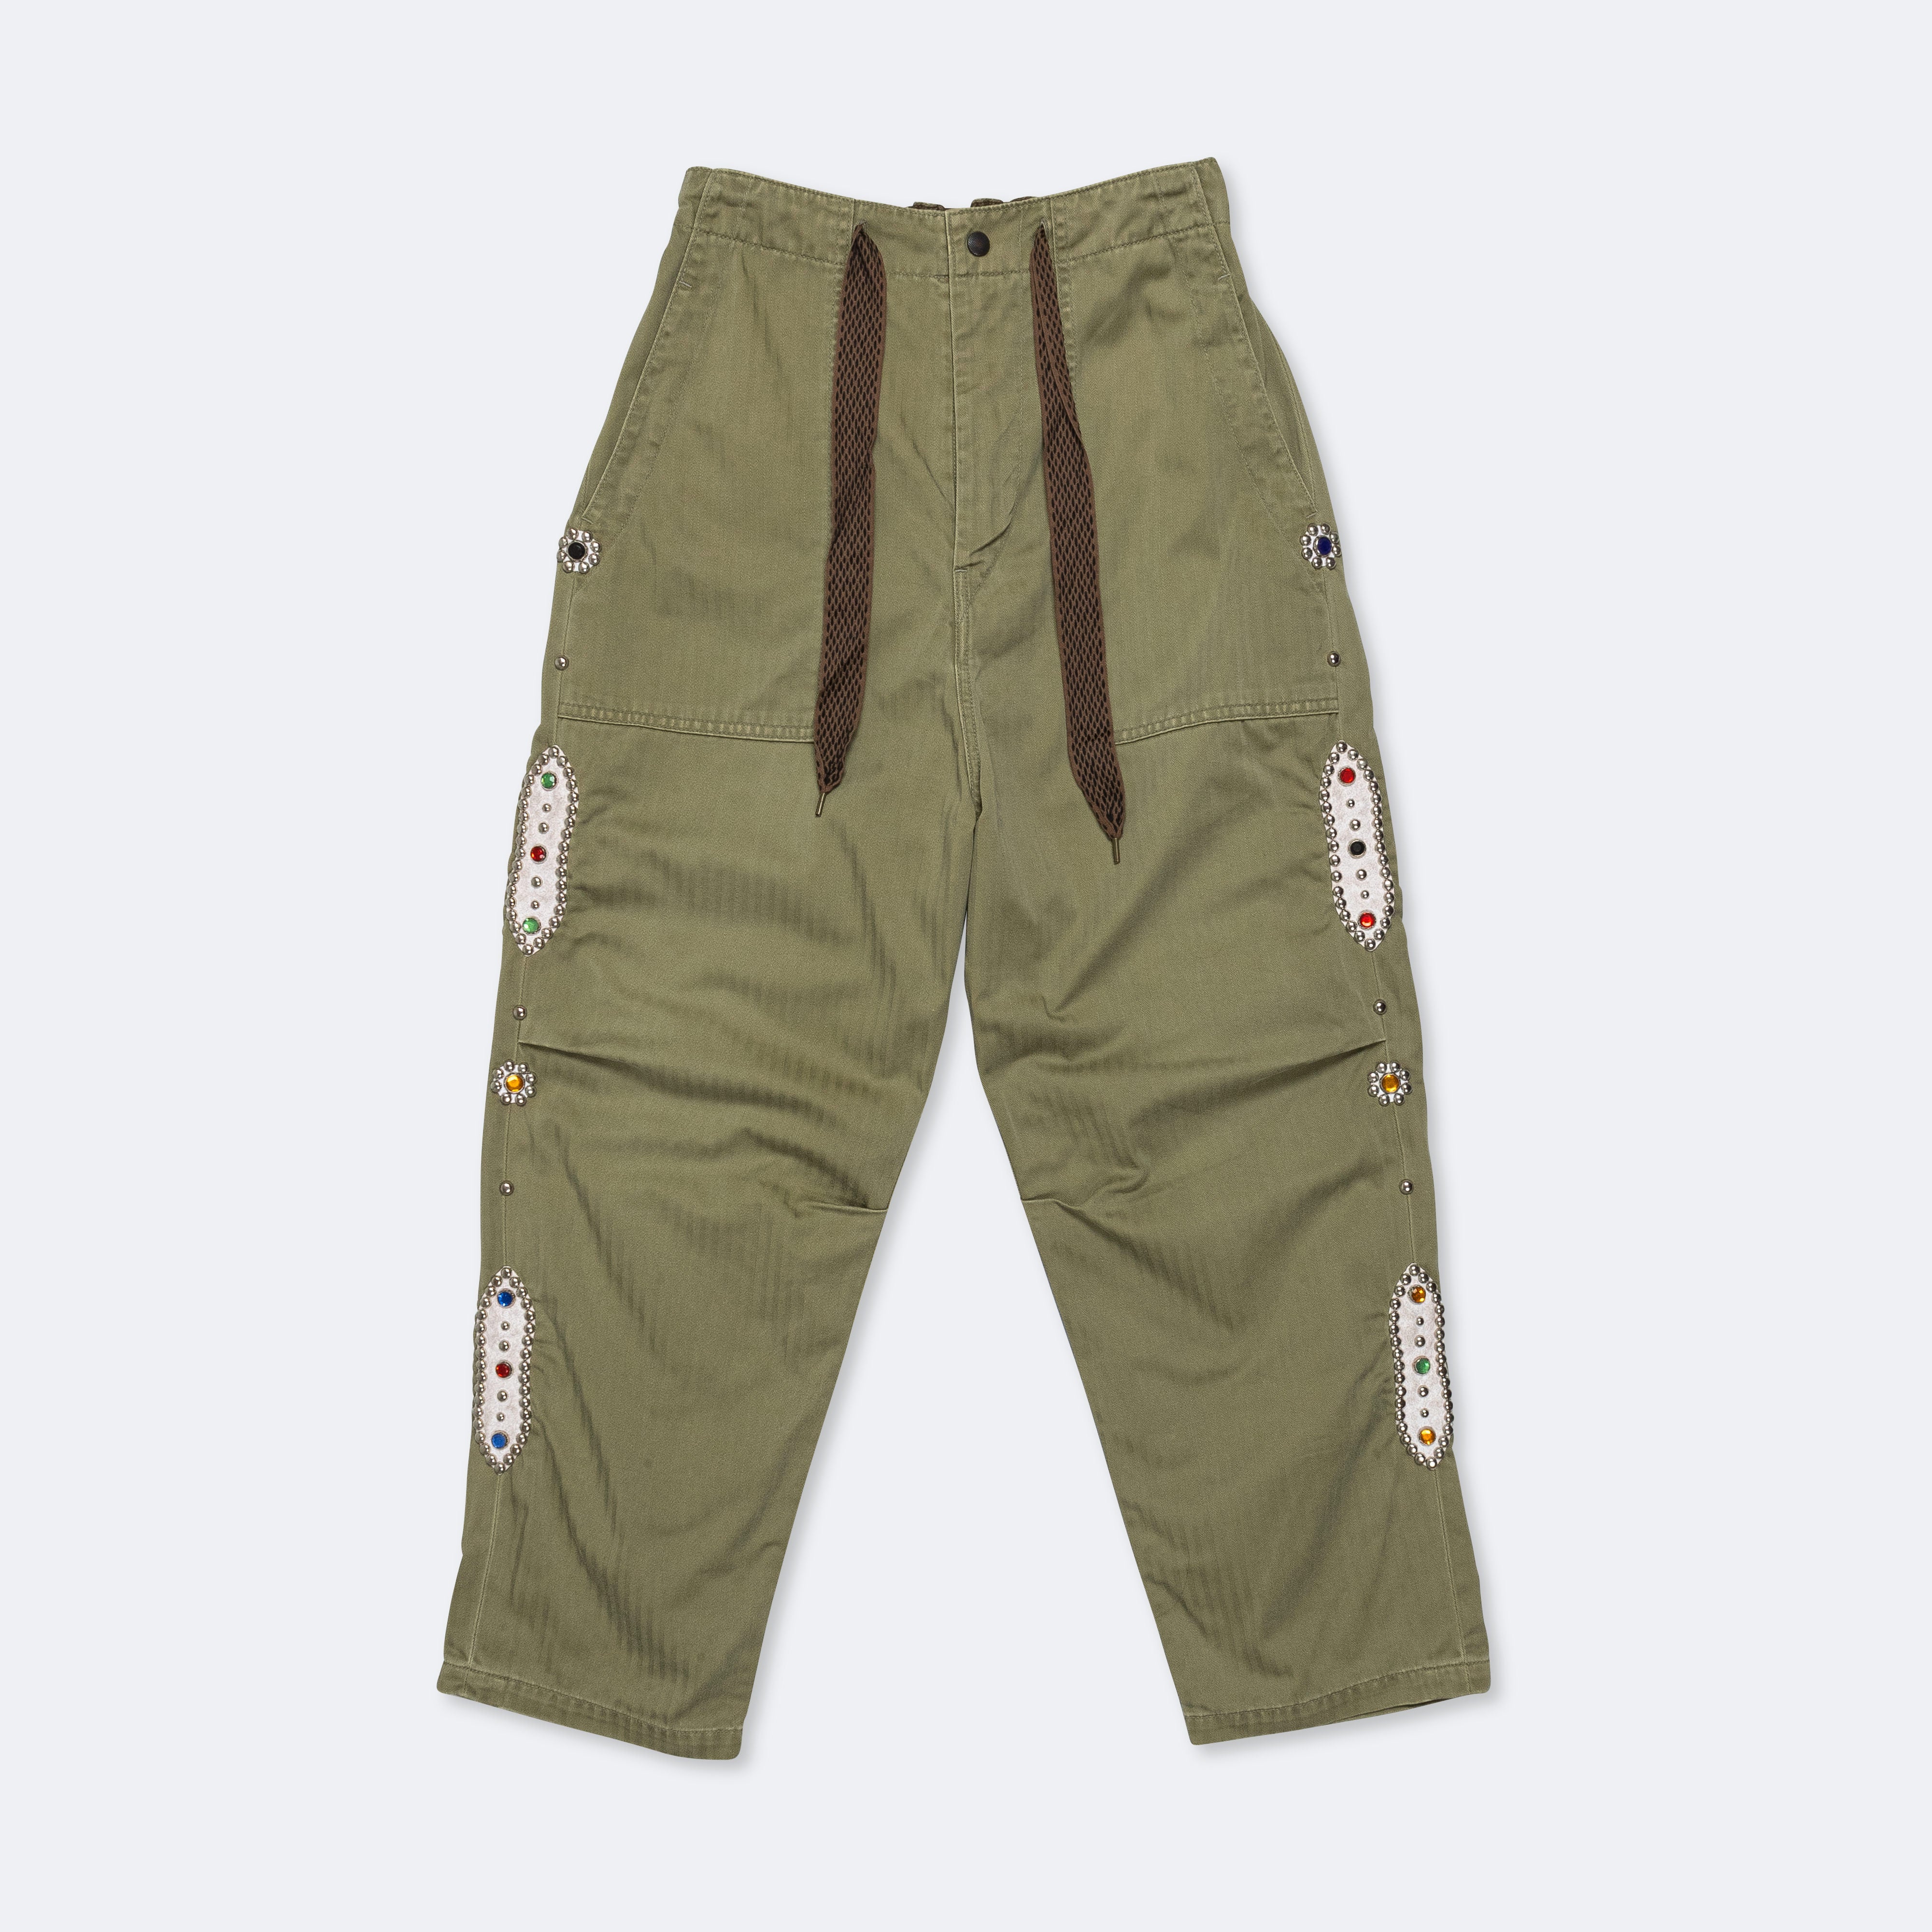 Steezy Pro Olive Green Cargo Pants